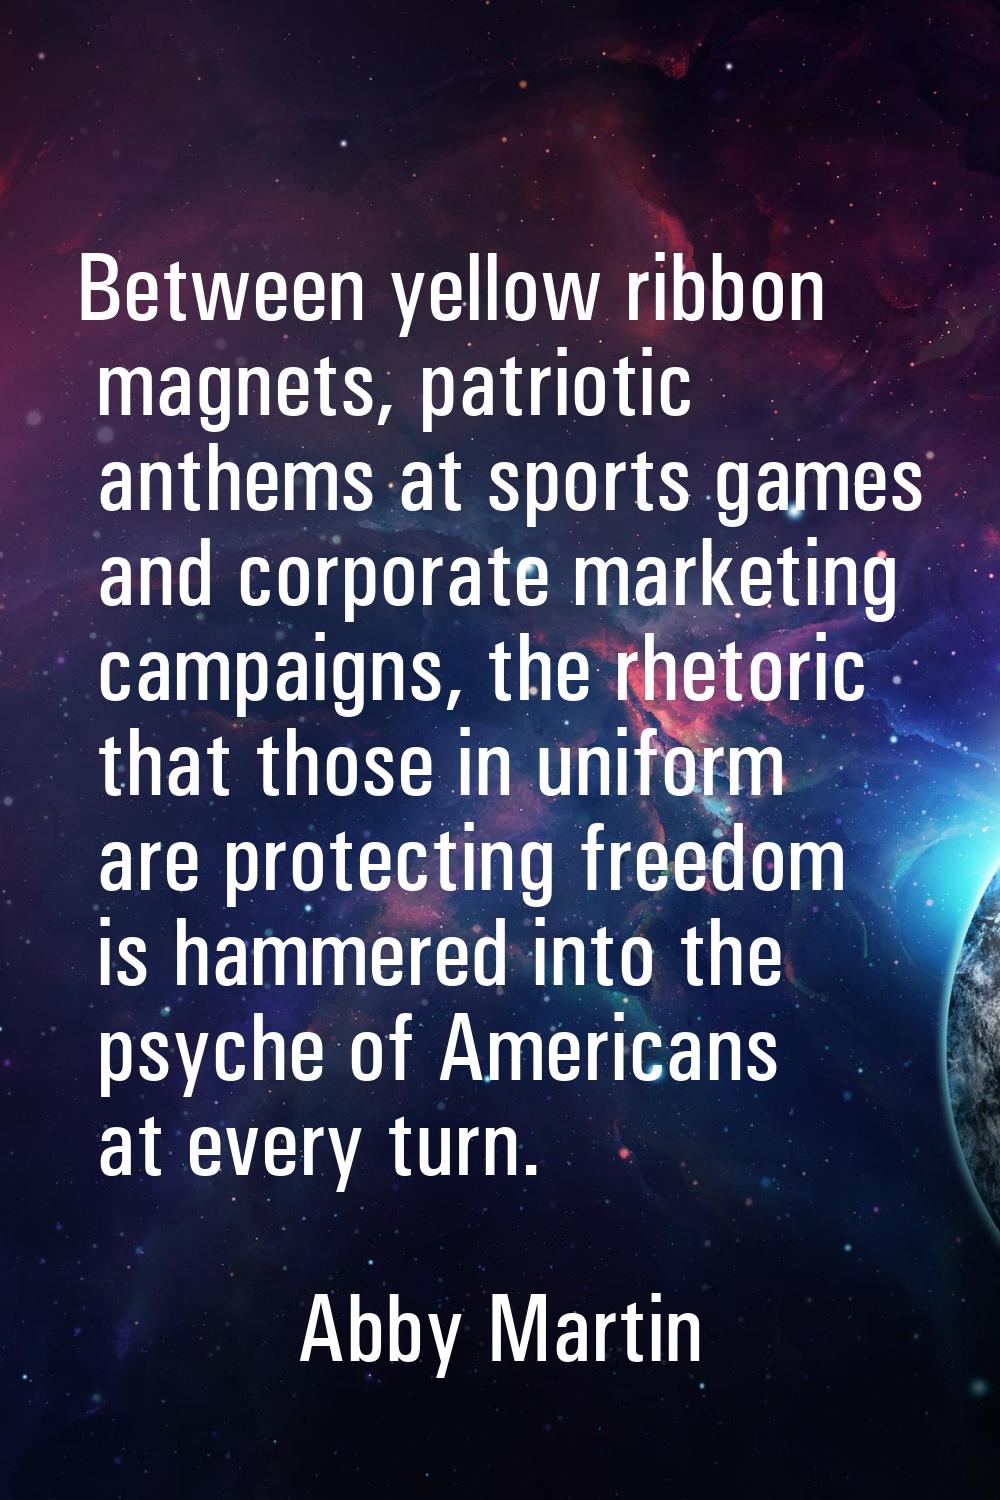 Between yellow ribbon magnets, patriotic anthems at sports games and corporate marketing campaigns,